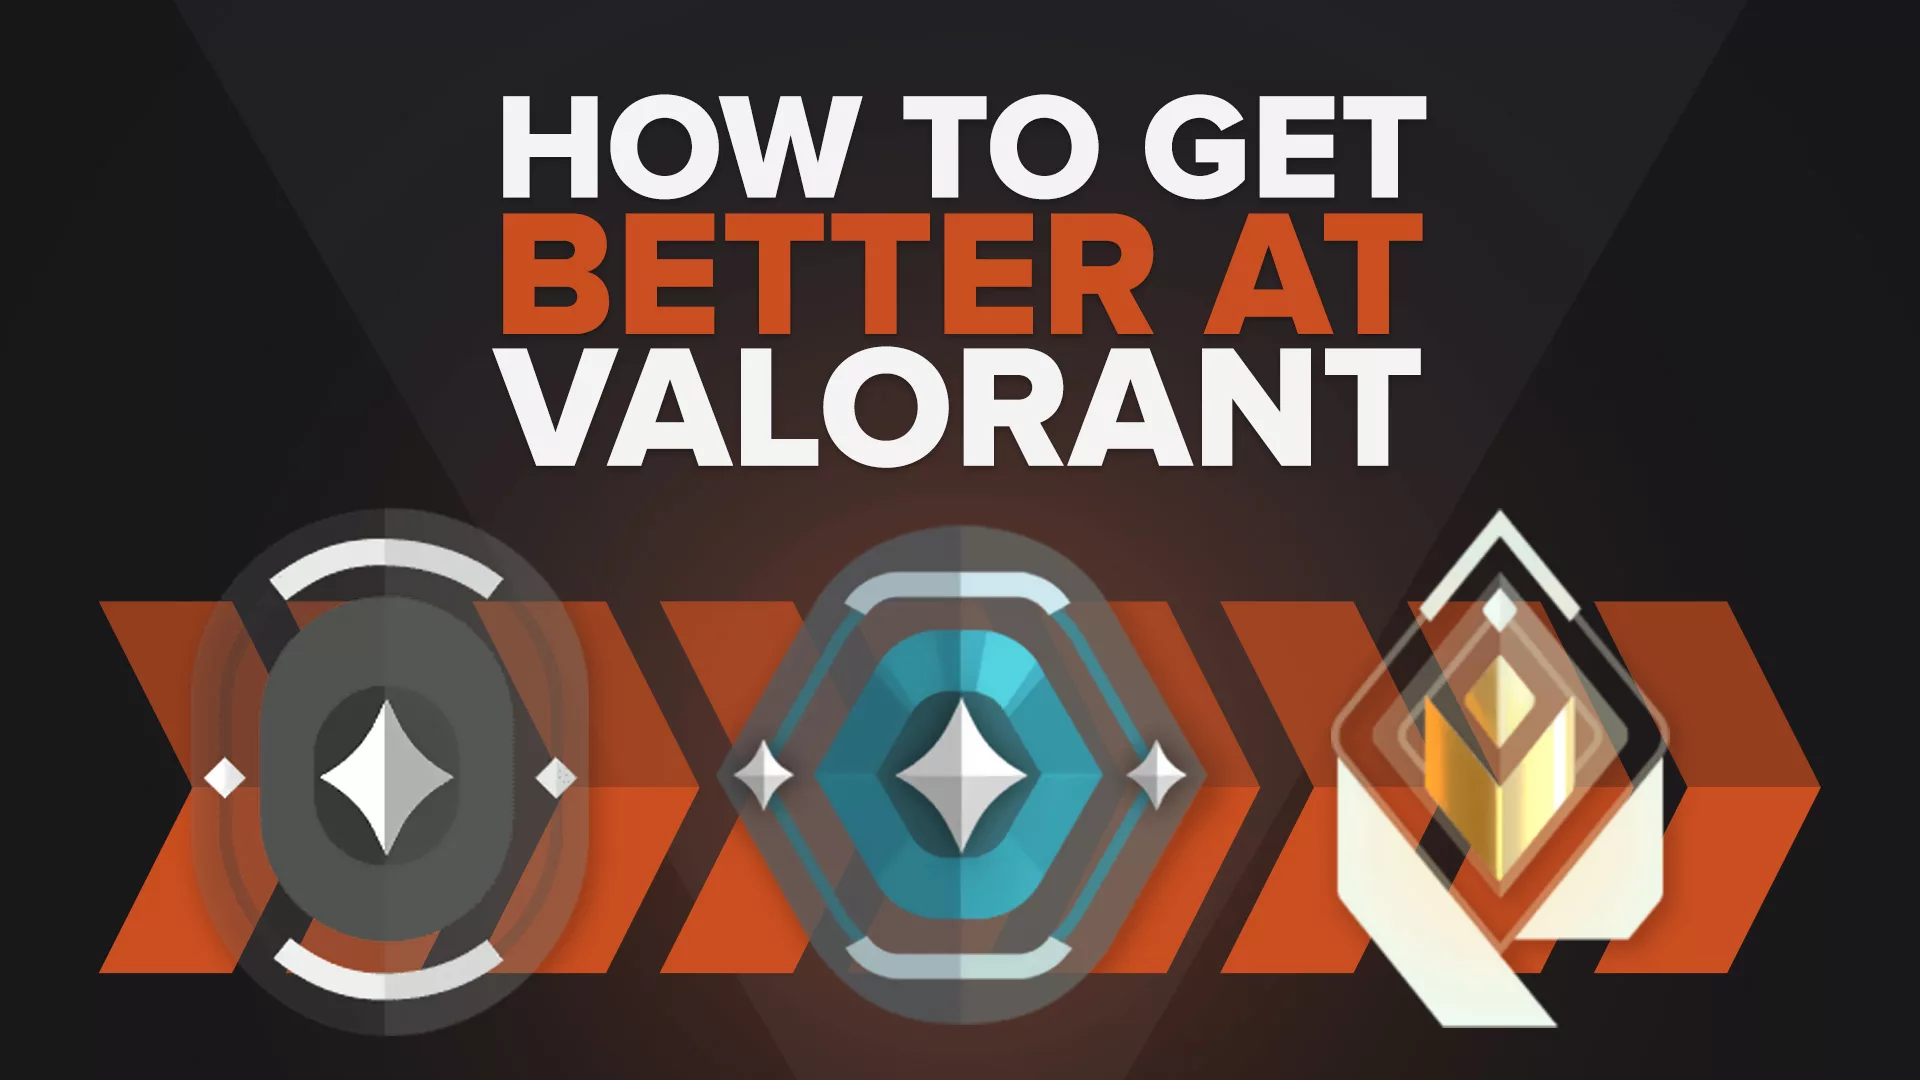 How to Get Better at Valorant